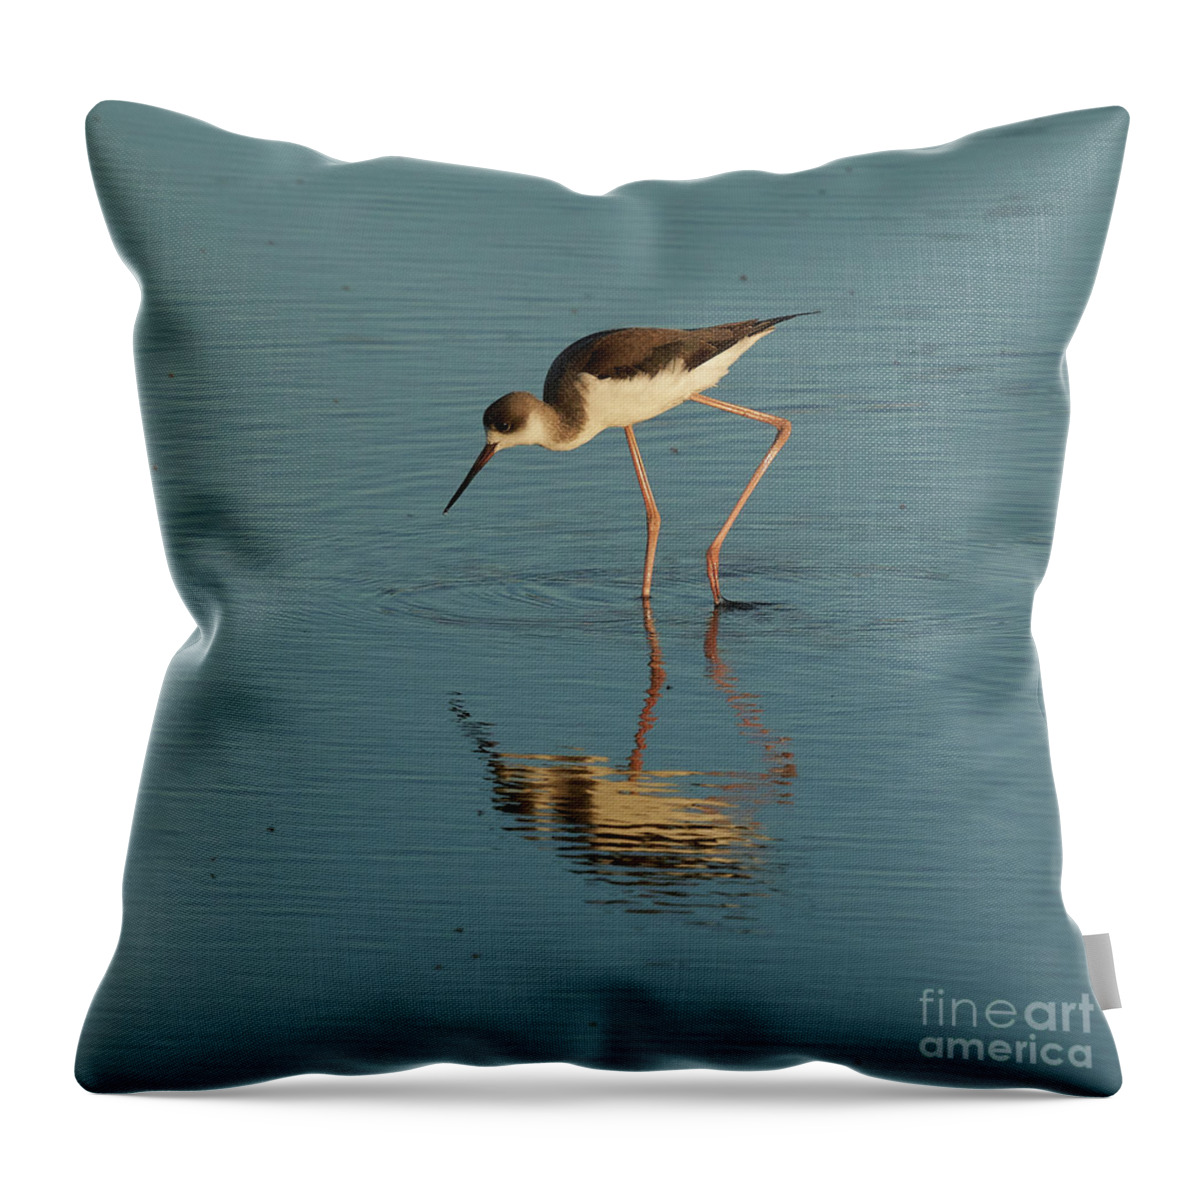 Muddy Throw Pillow featuring the photograph Black-winged Stilt by Pablo Avanzini